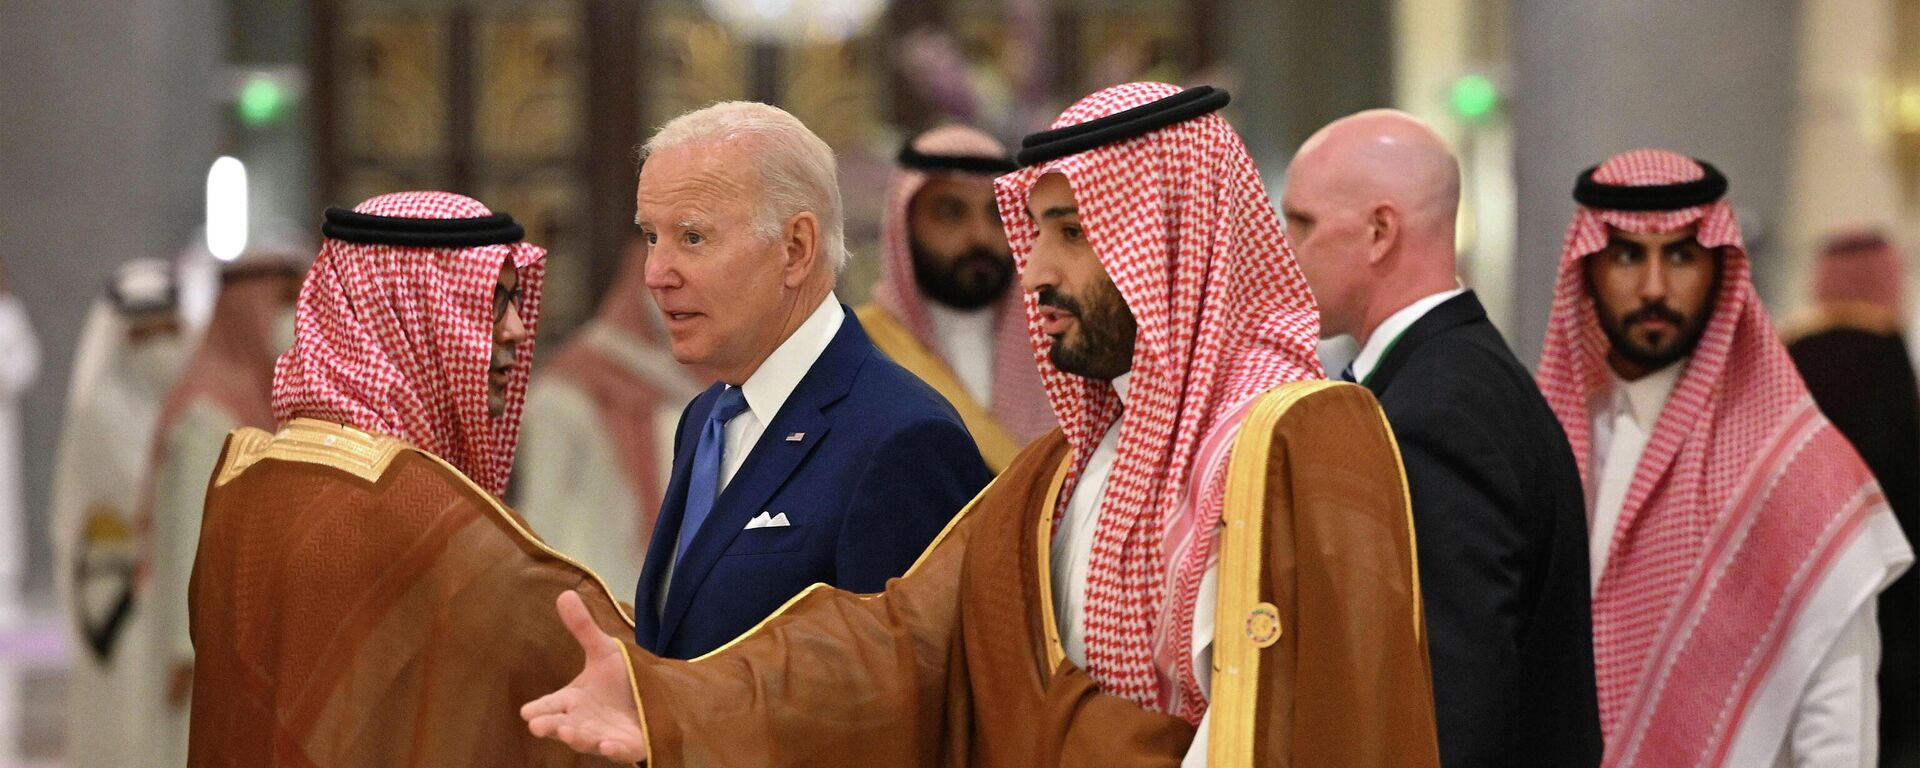 U.S. President Joe Biden, center left, and Saudi Crown Prince Mohammed bin Salman, center, arrive for the family photo during the GCC+3 (Gulf Cooperation Council) meeting at a hotel in Saudi Arabia's Red Sea coastal city of Jeddah Saturday, July 16, 2022 - Sputnik International, 1920, 26.12.2023